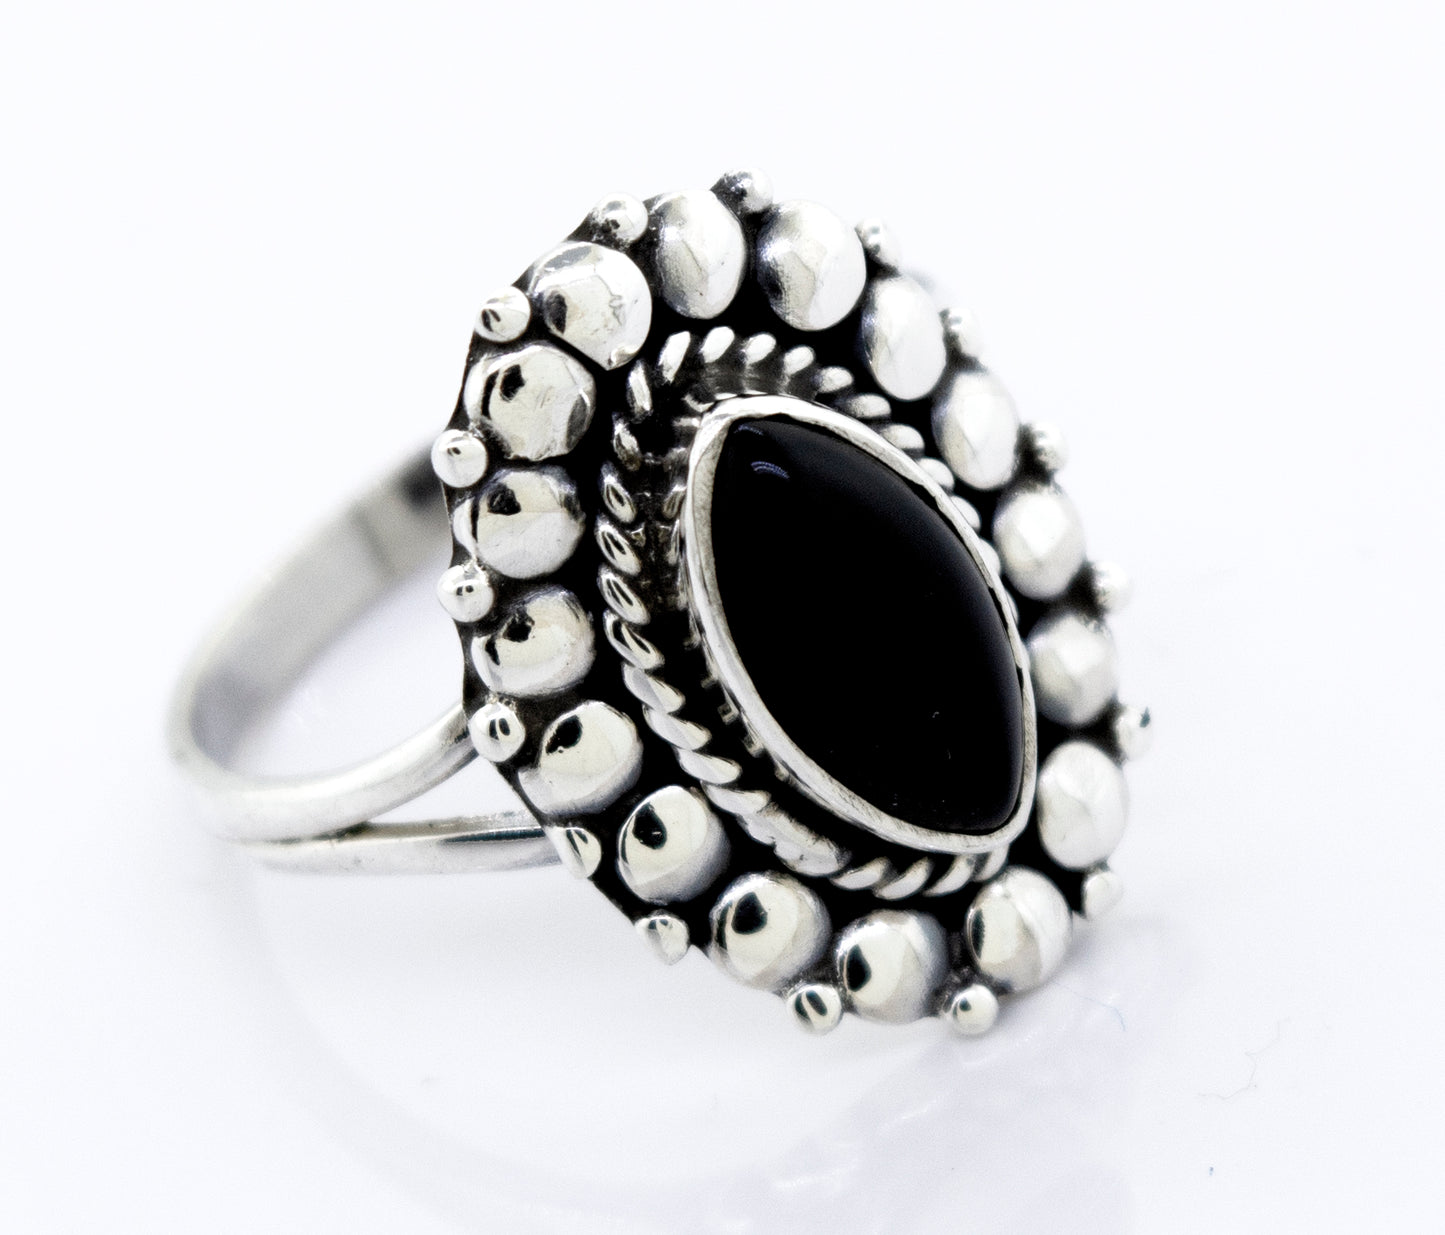 A Marquise Shaped Elegant Onyx Ring adorned with a beautiful black onyx stone, made by Super Silver.